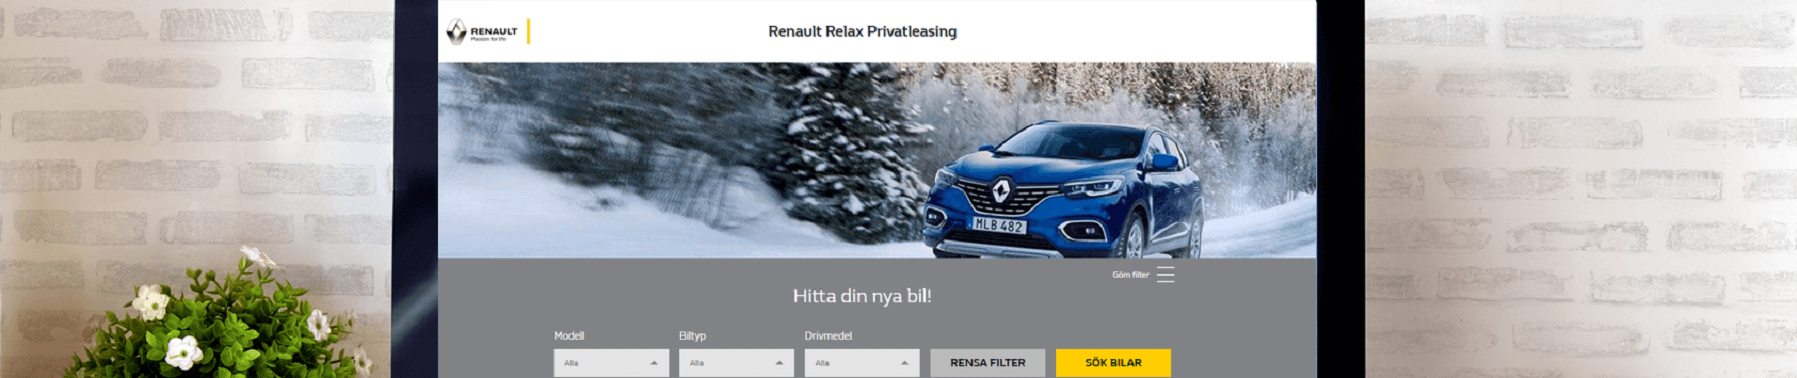 Renault Relax